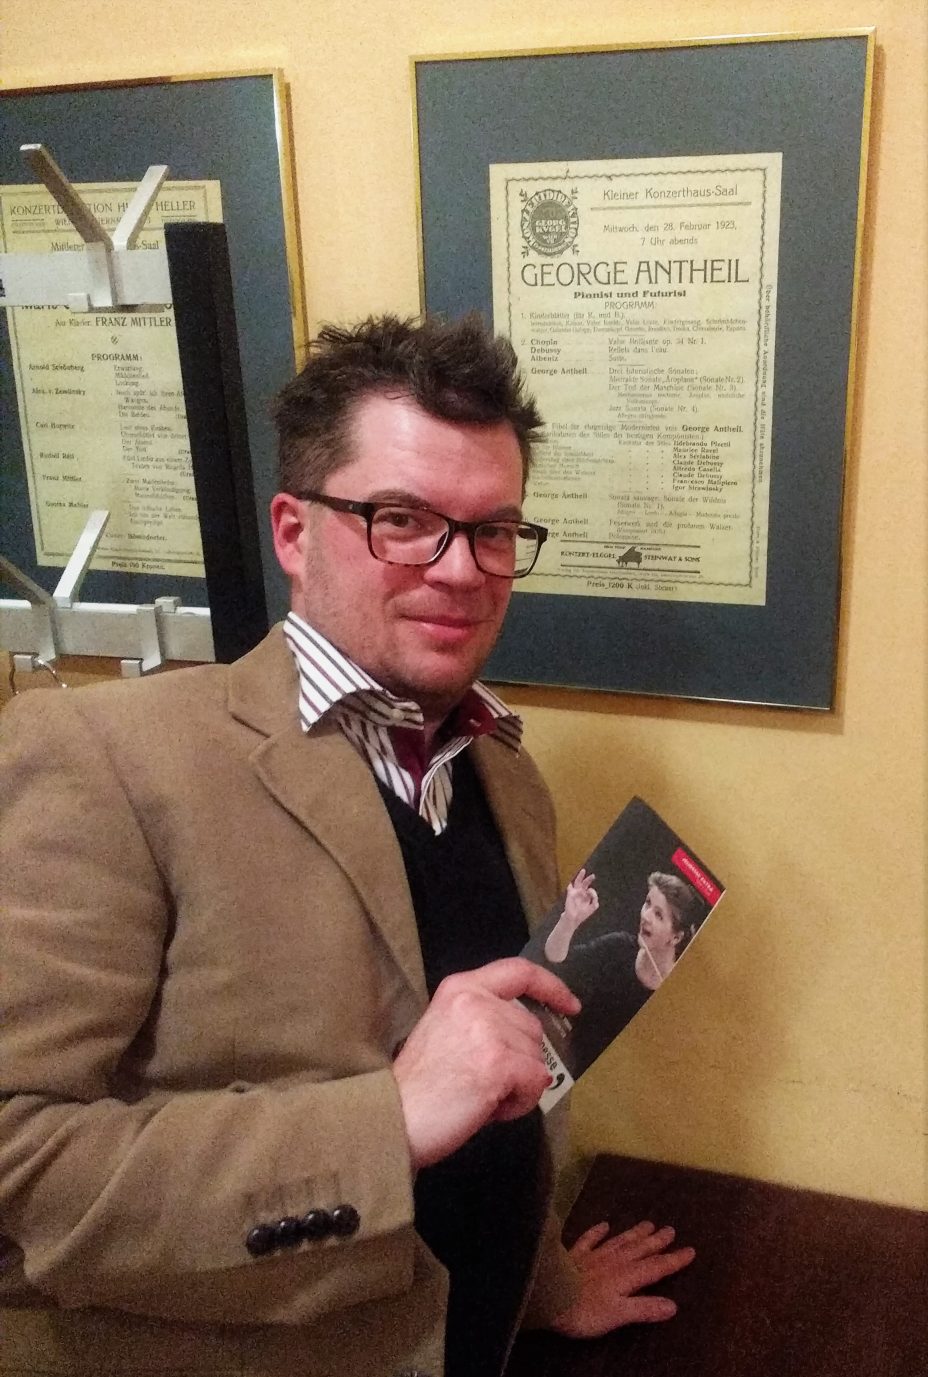 The author standing in front of the programme of a 1923 Antheil recital